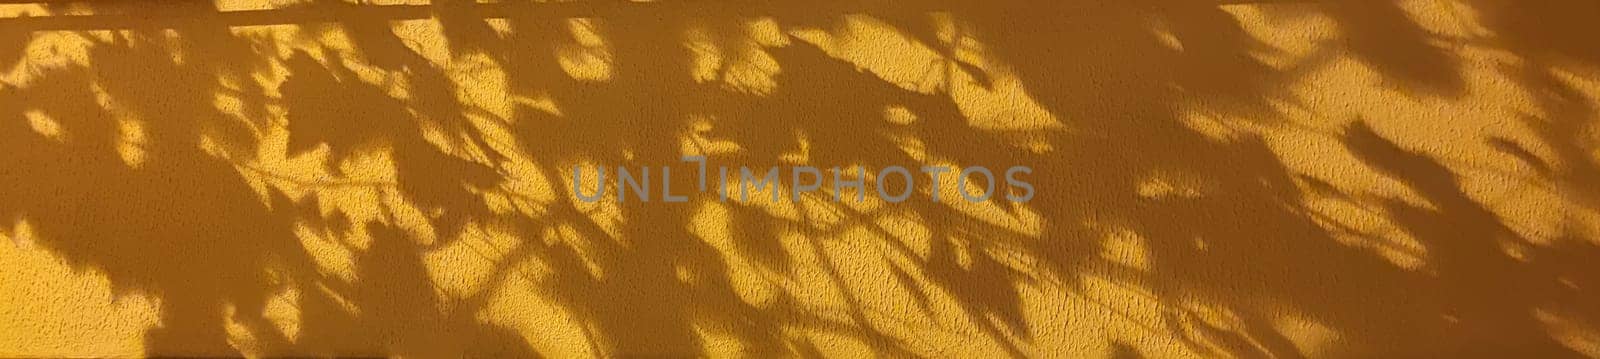 blurred shadow from leaves on yellow plastered wall for horizontal background